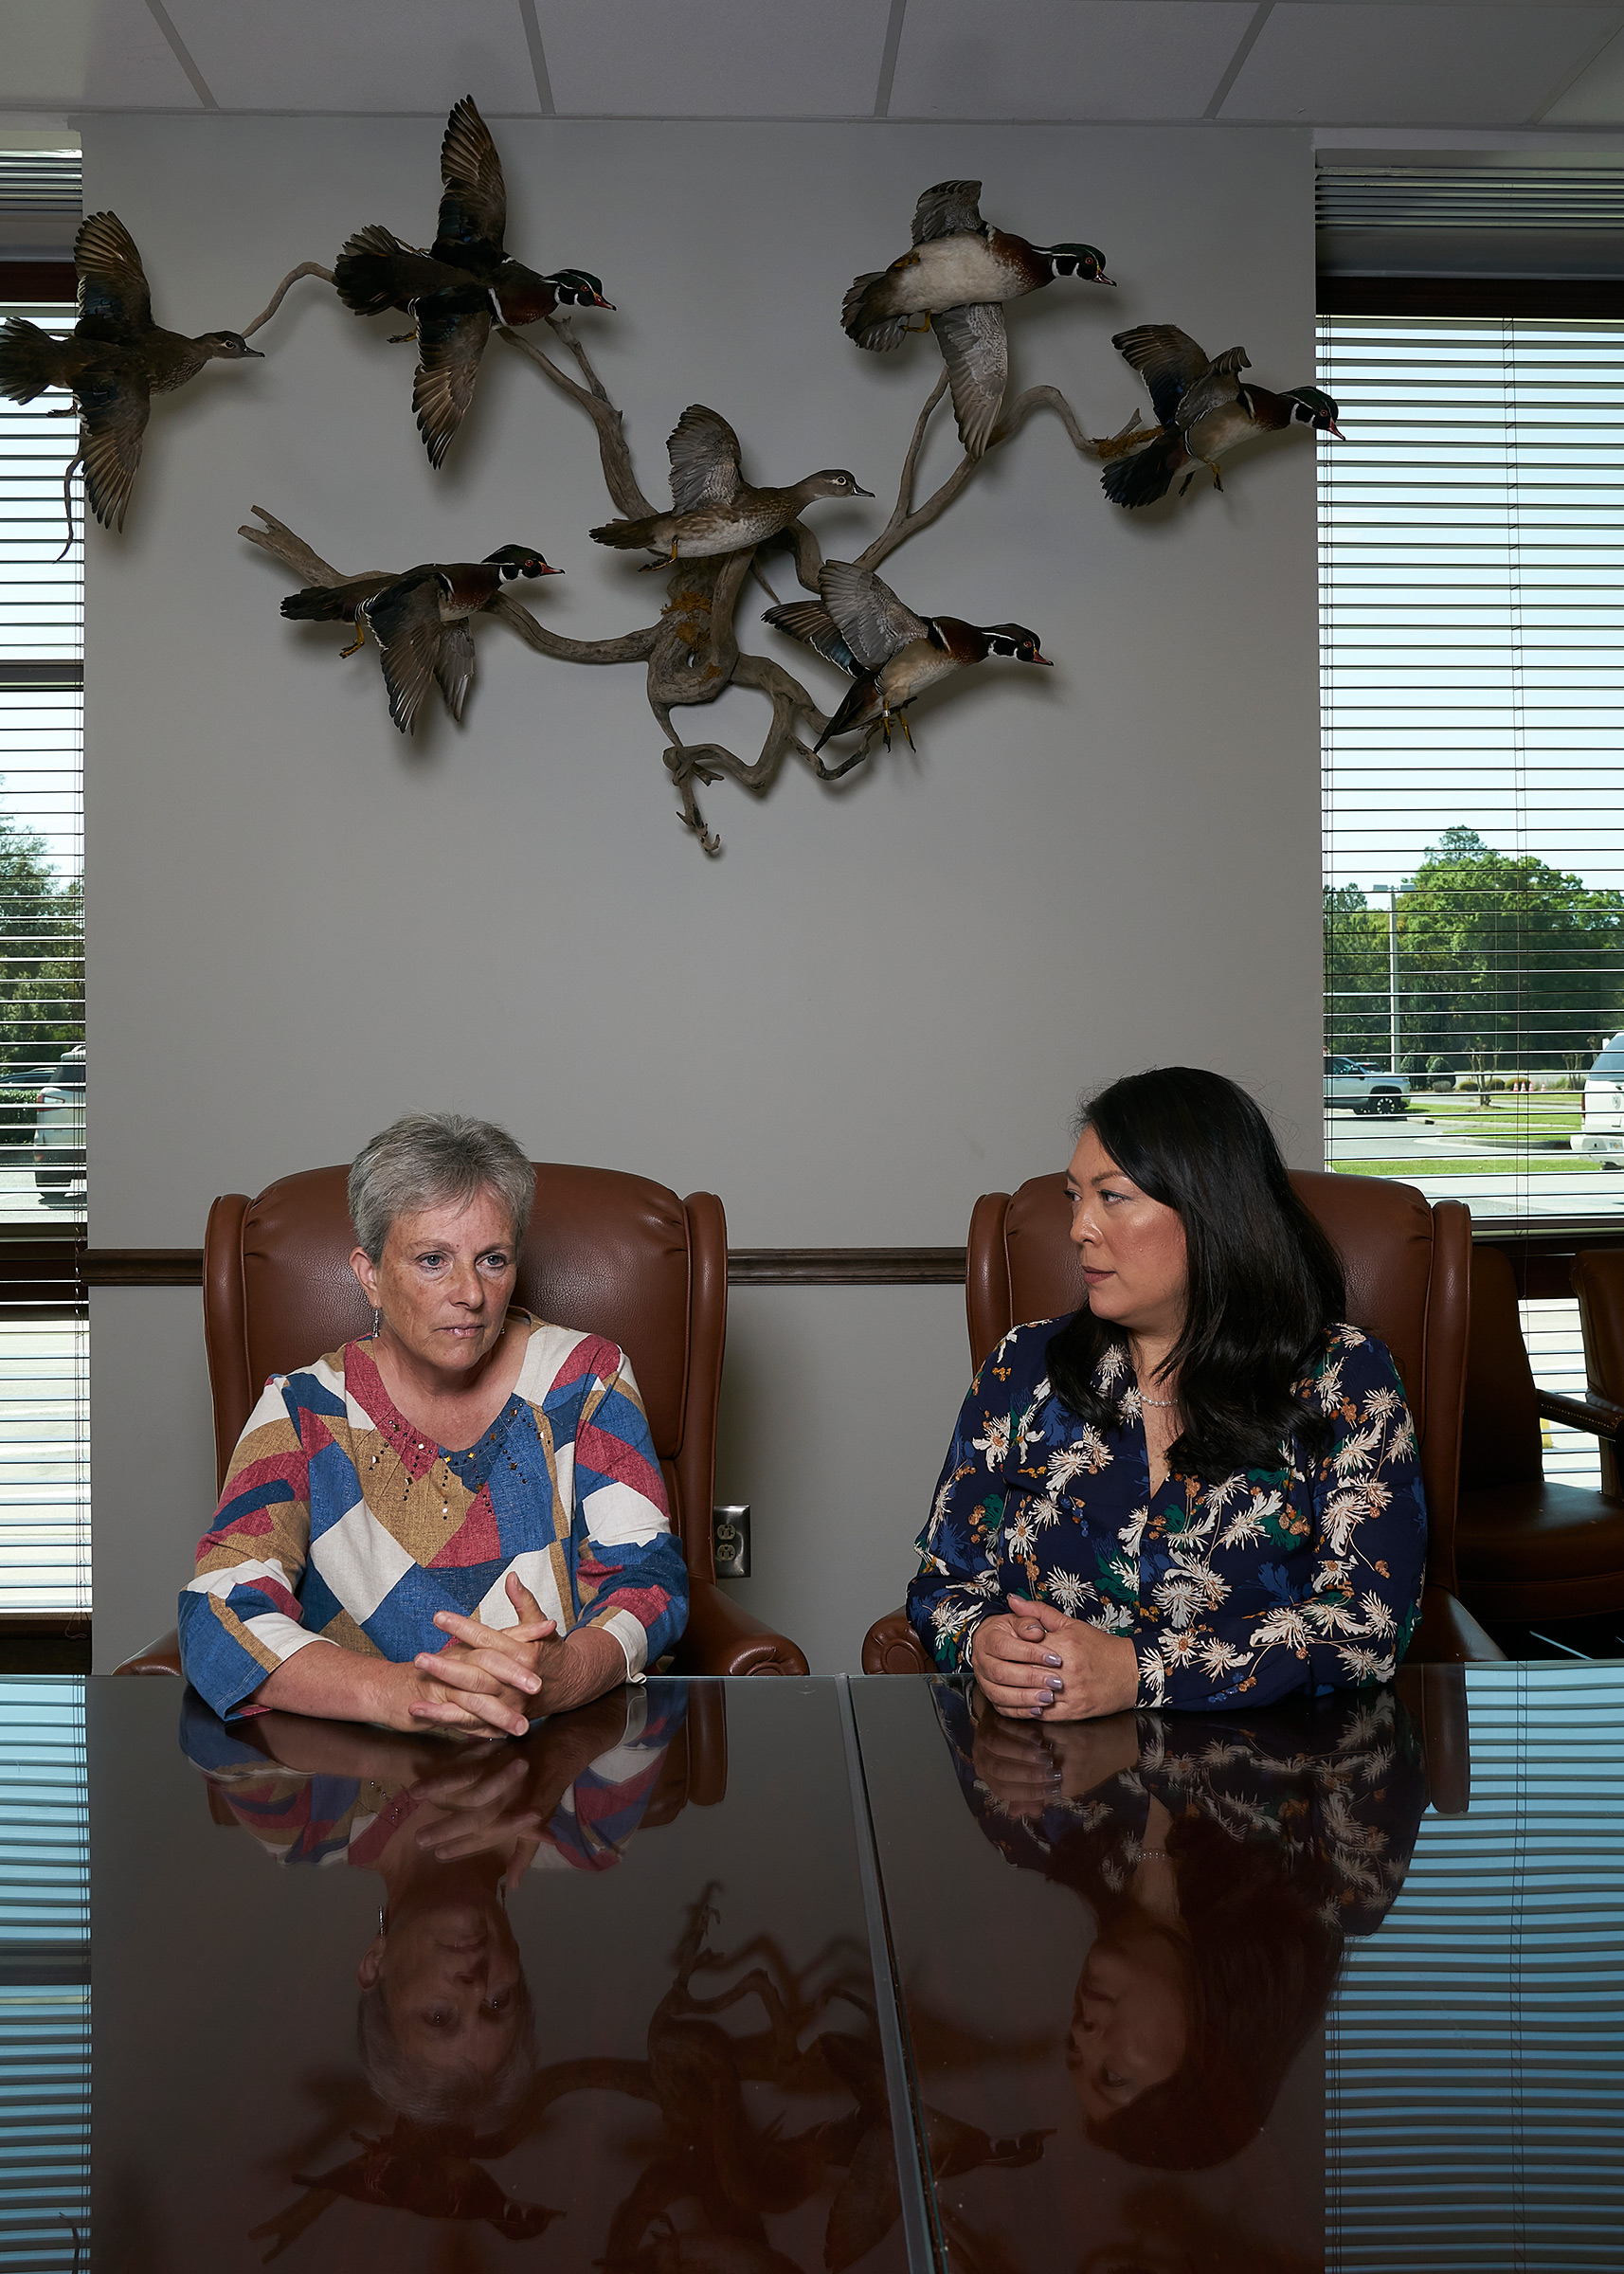 Miller County Hospital CEO Robin Rau, left, and Clinch Memorial Hospital CEO Angela Ammons at Clinch Memorial in Homerville, Ga., on March 19, 2020.